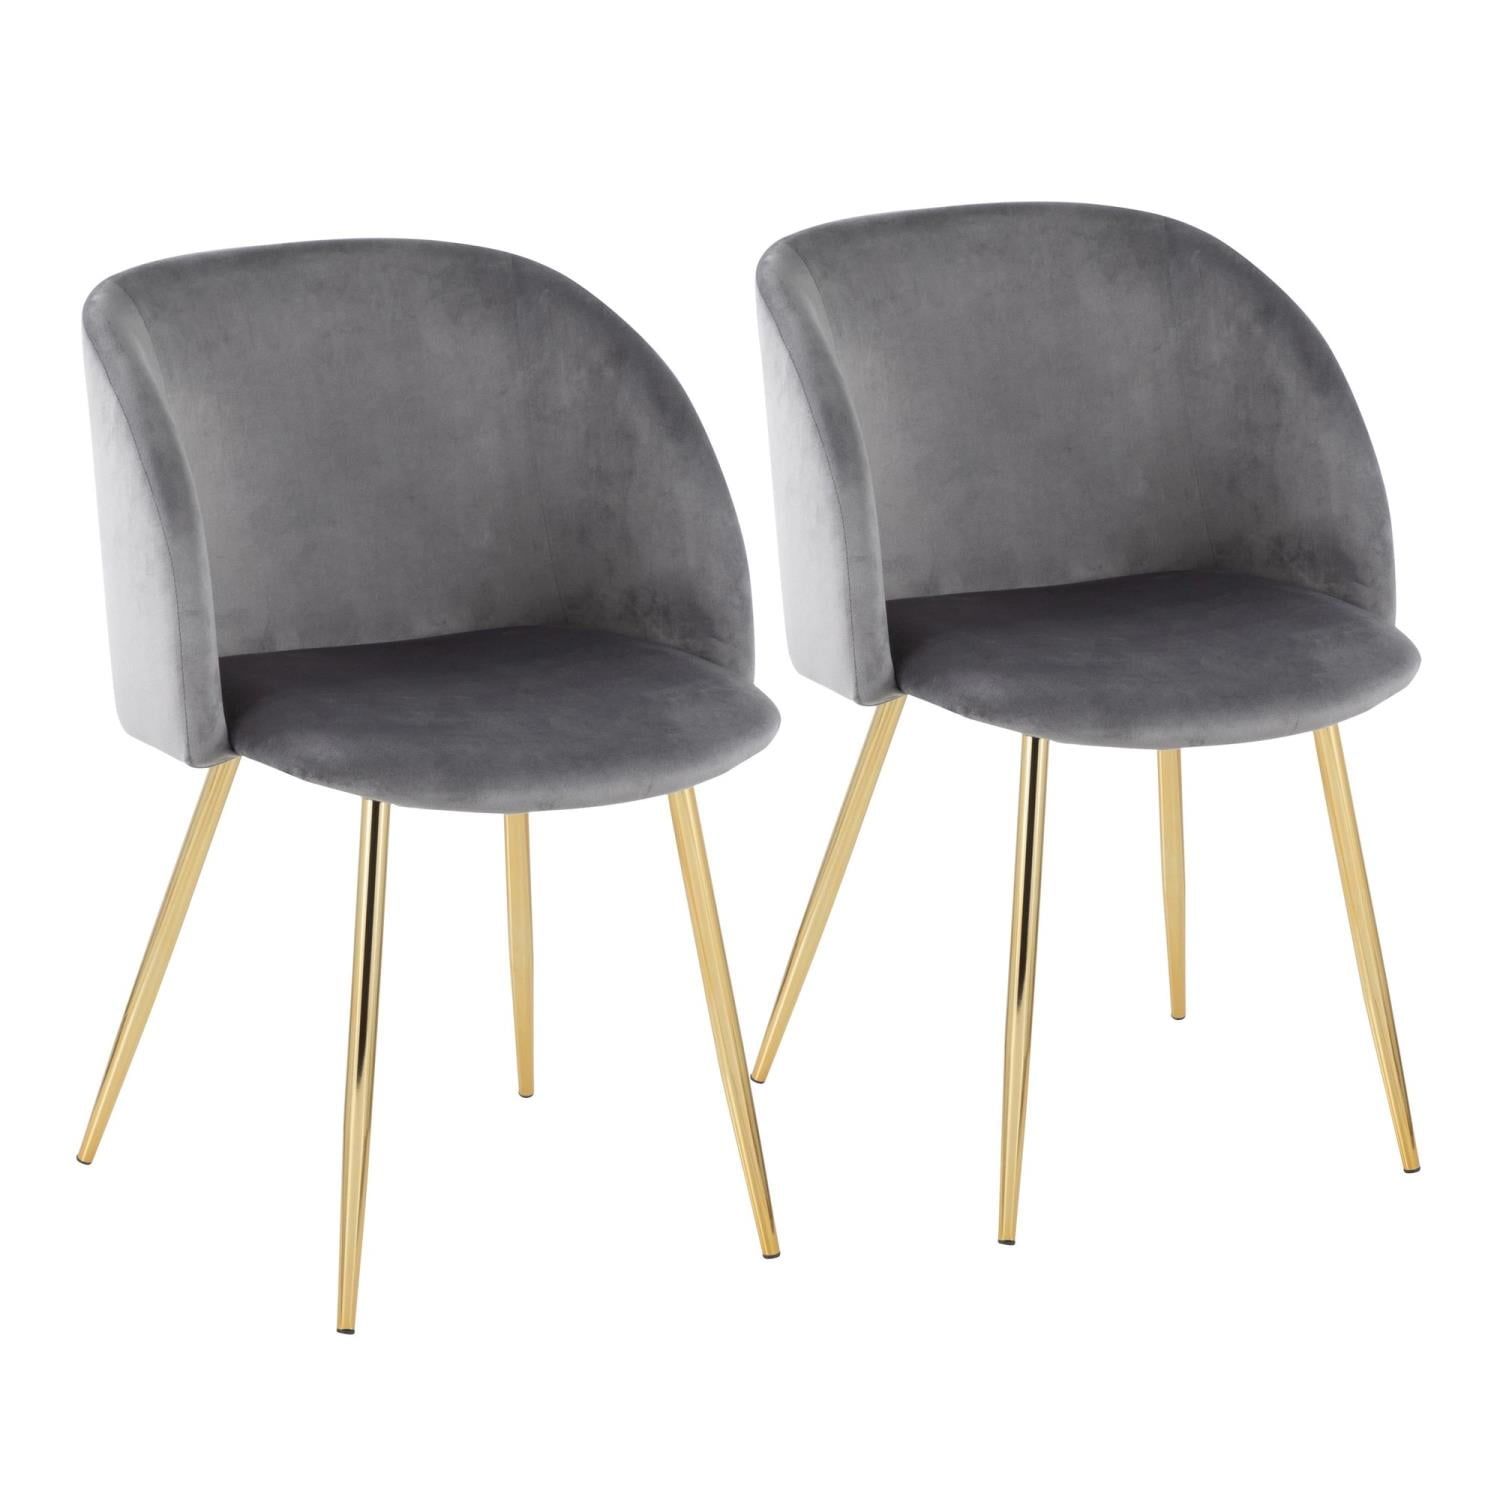 Silver Velvet Upholstered Arm Chair with Gold Legs, Set of 2